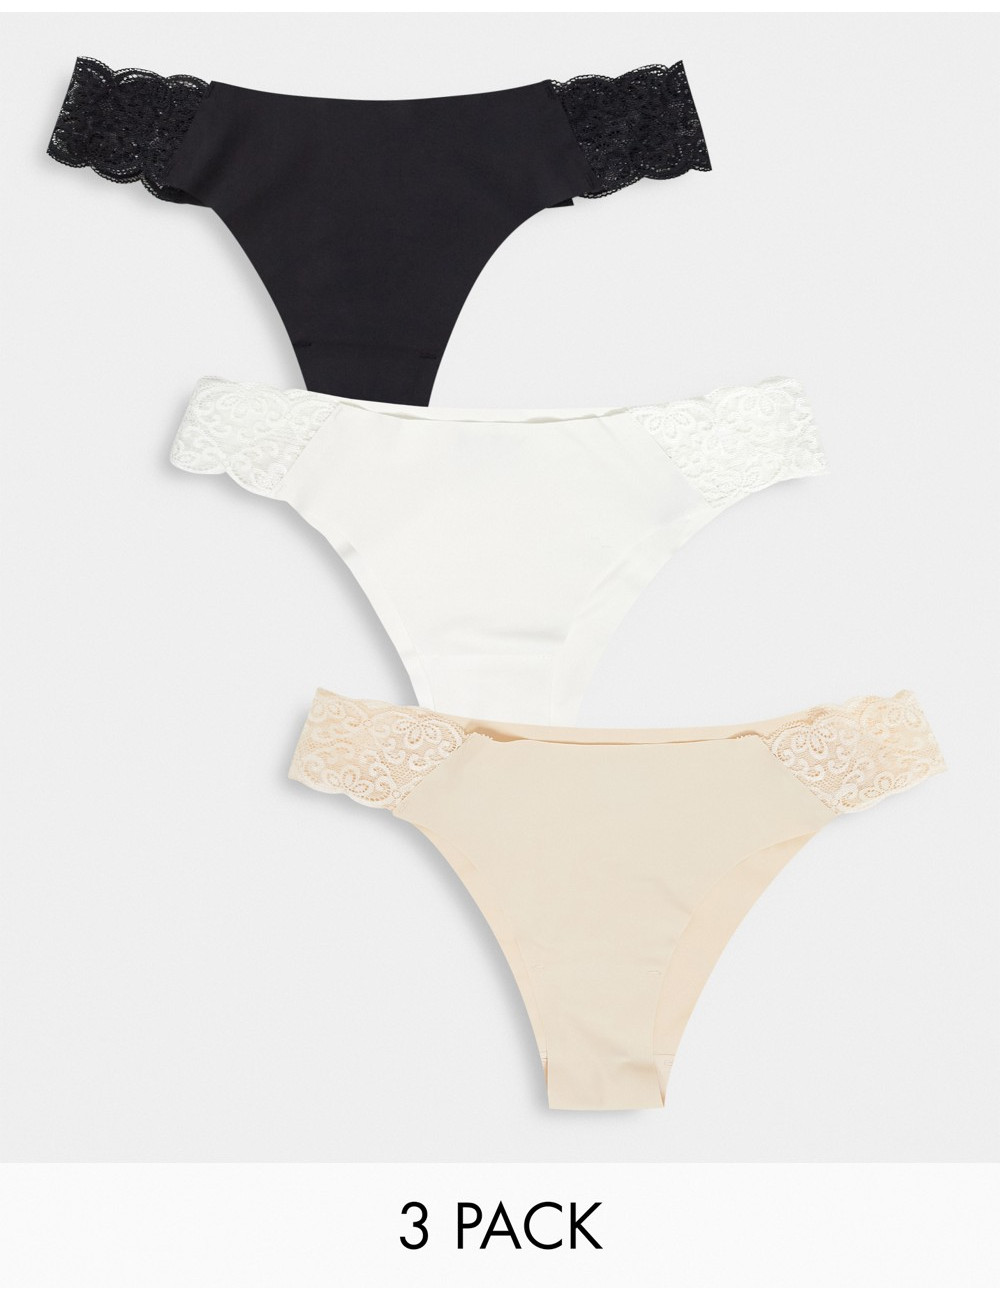 Cotton:On lace side thong...